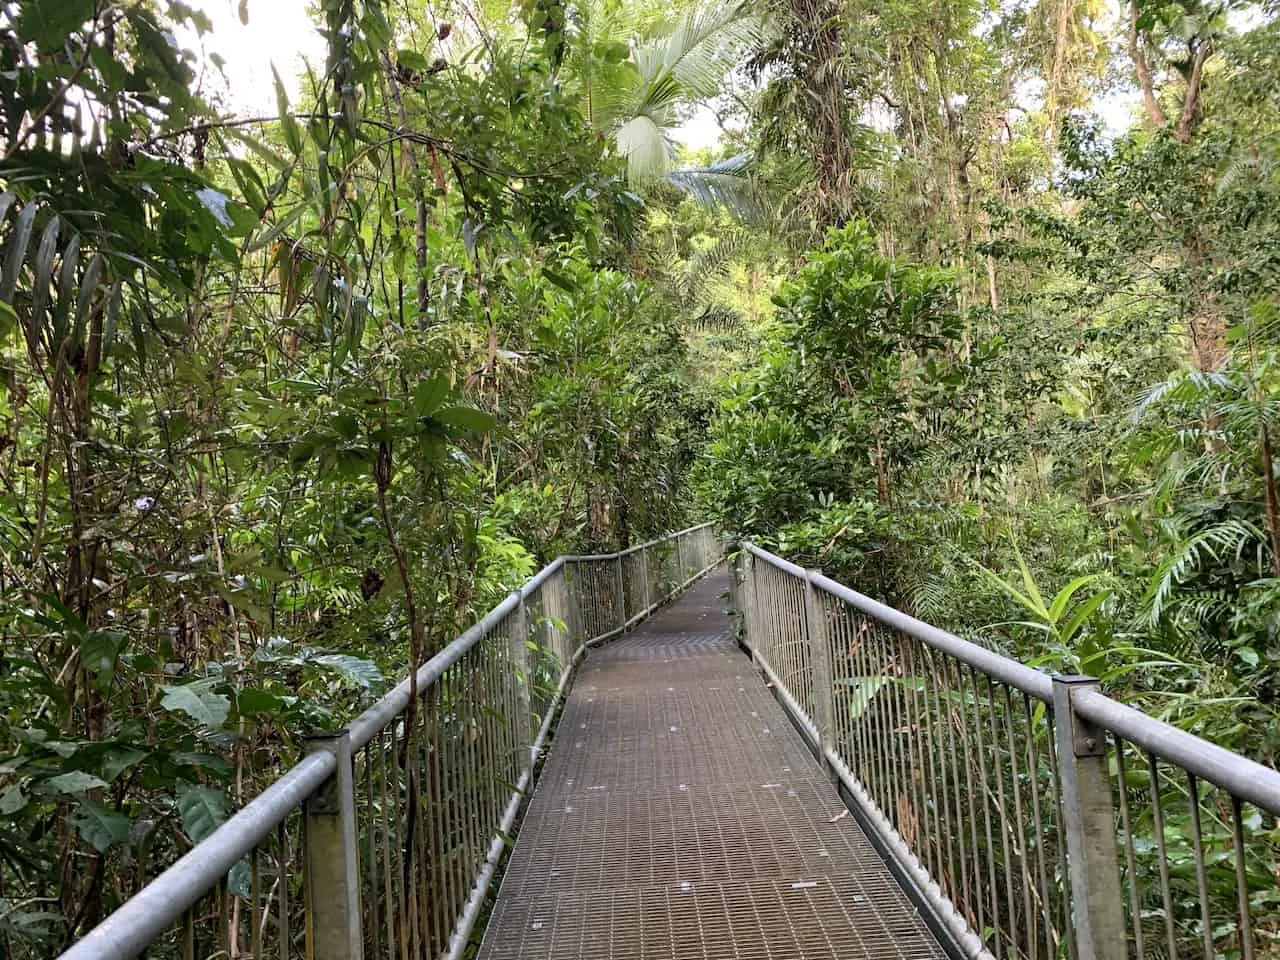 Daintree Discovery Centre Walkway